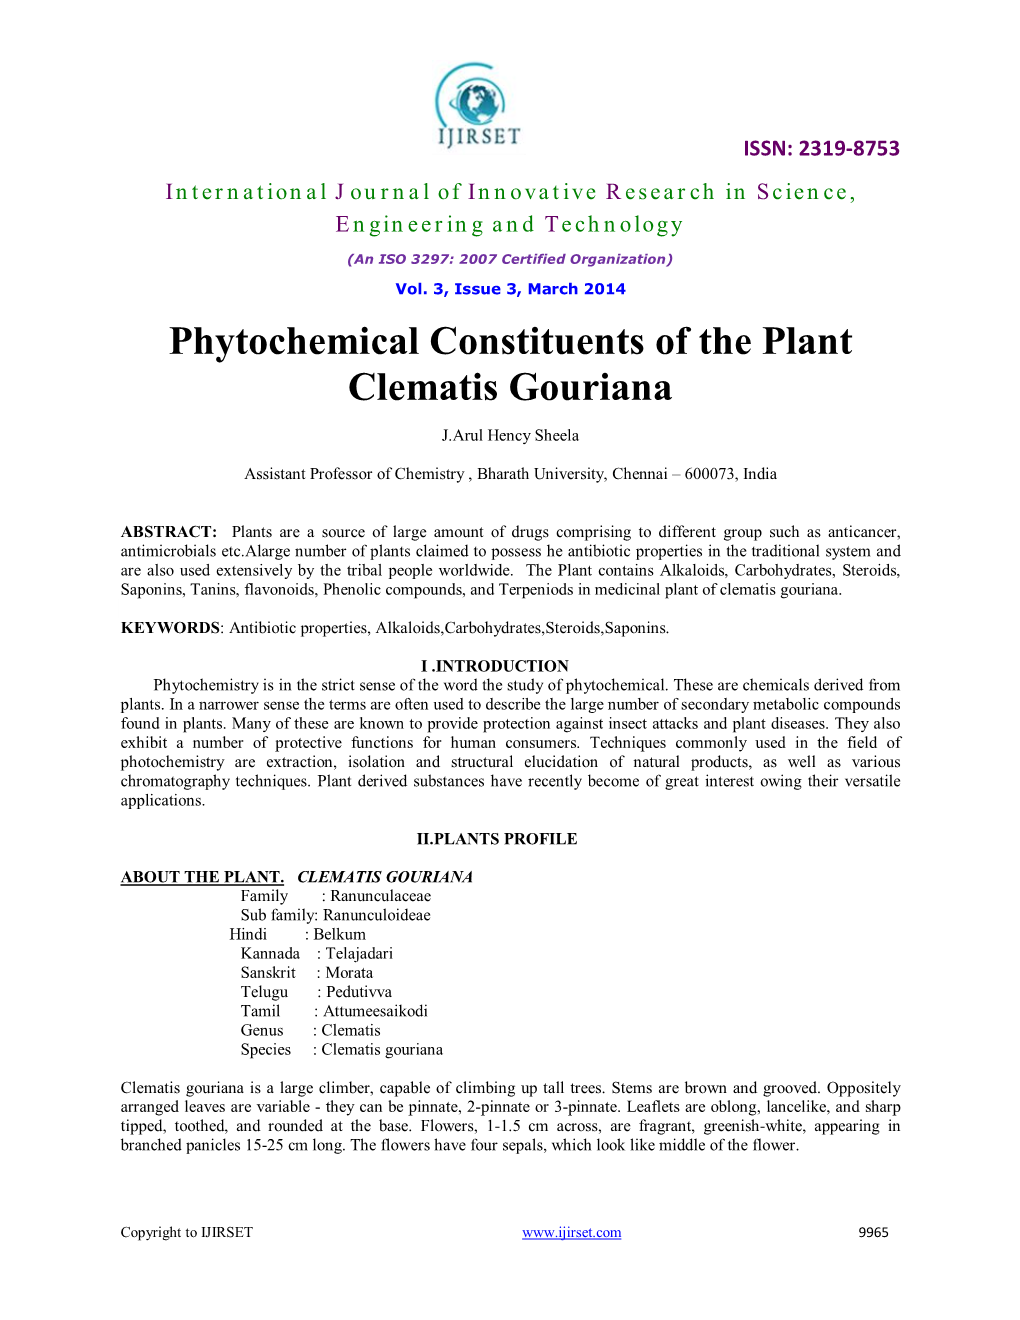 Phytochemical Constituents of the Plant Clematis Gouriana